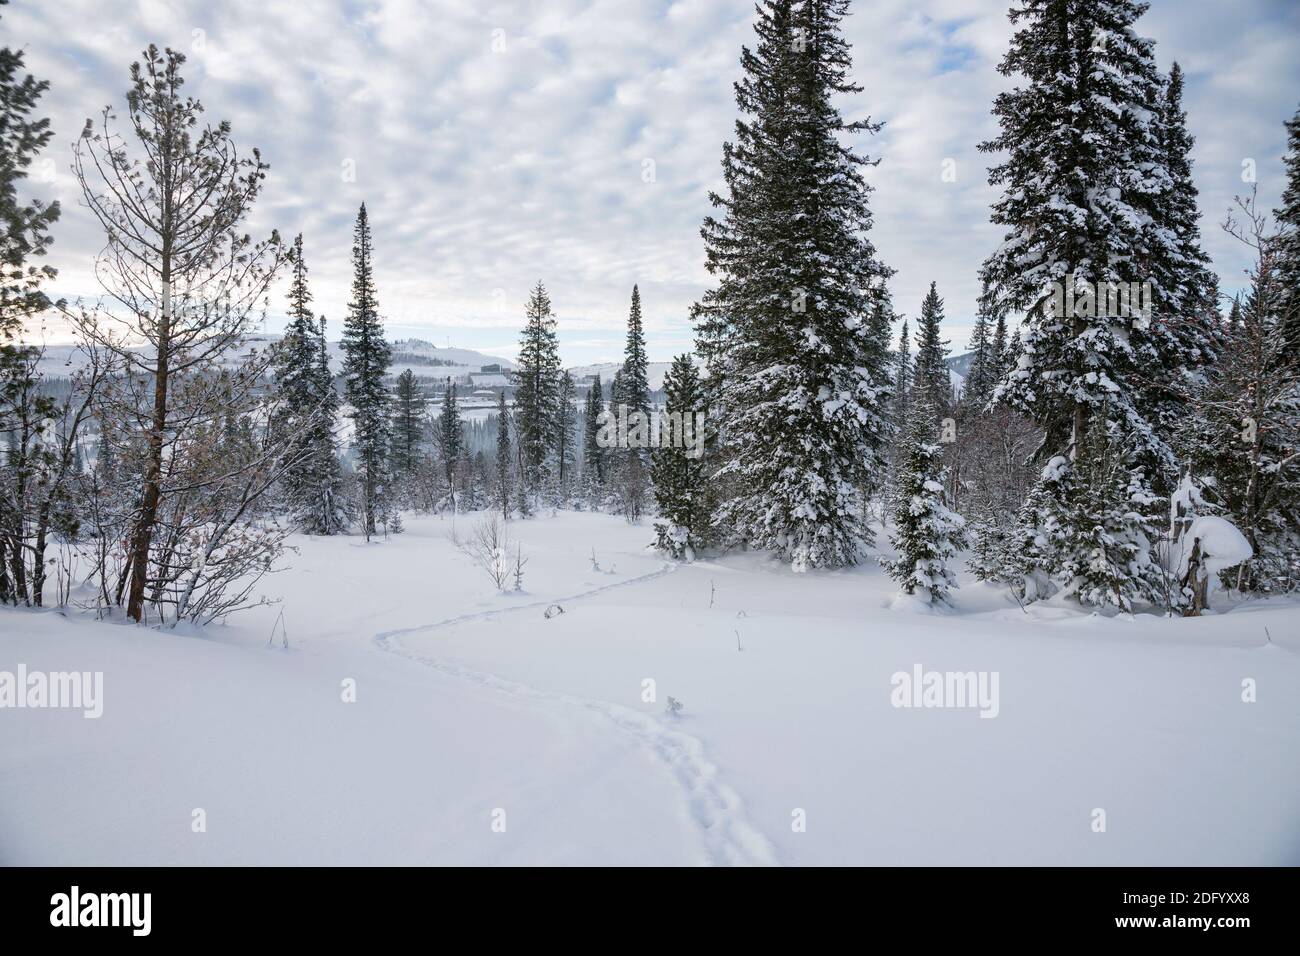 Animal tracks lead through snowdrifts among snow-covered trees in cloudy weather, in a winter forest. Stock Photo